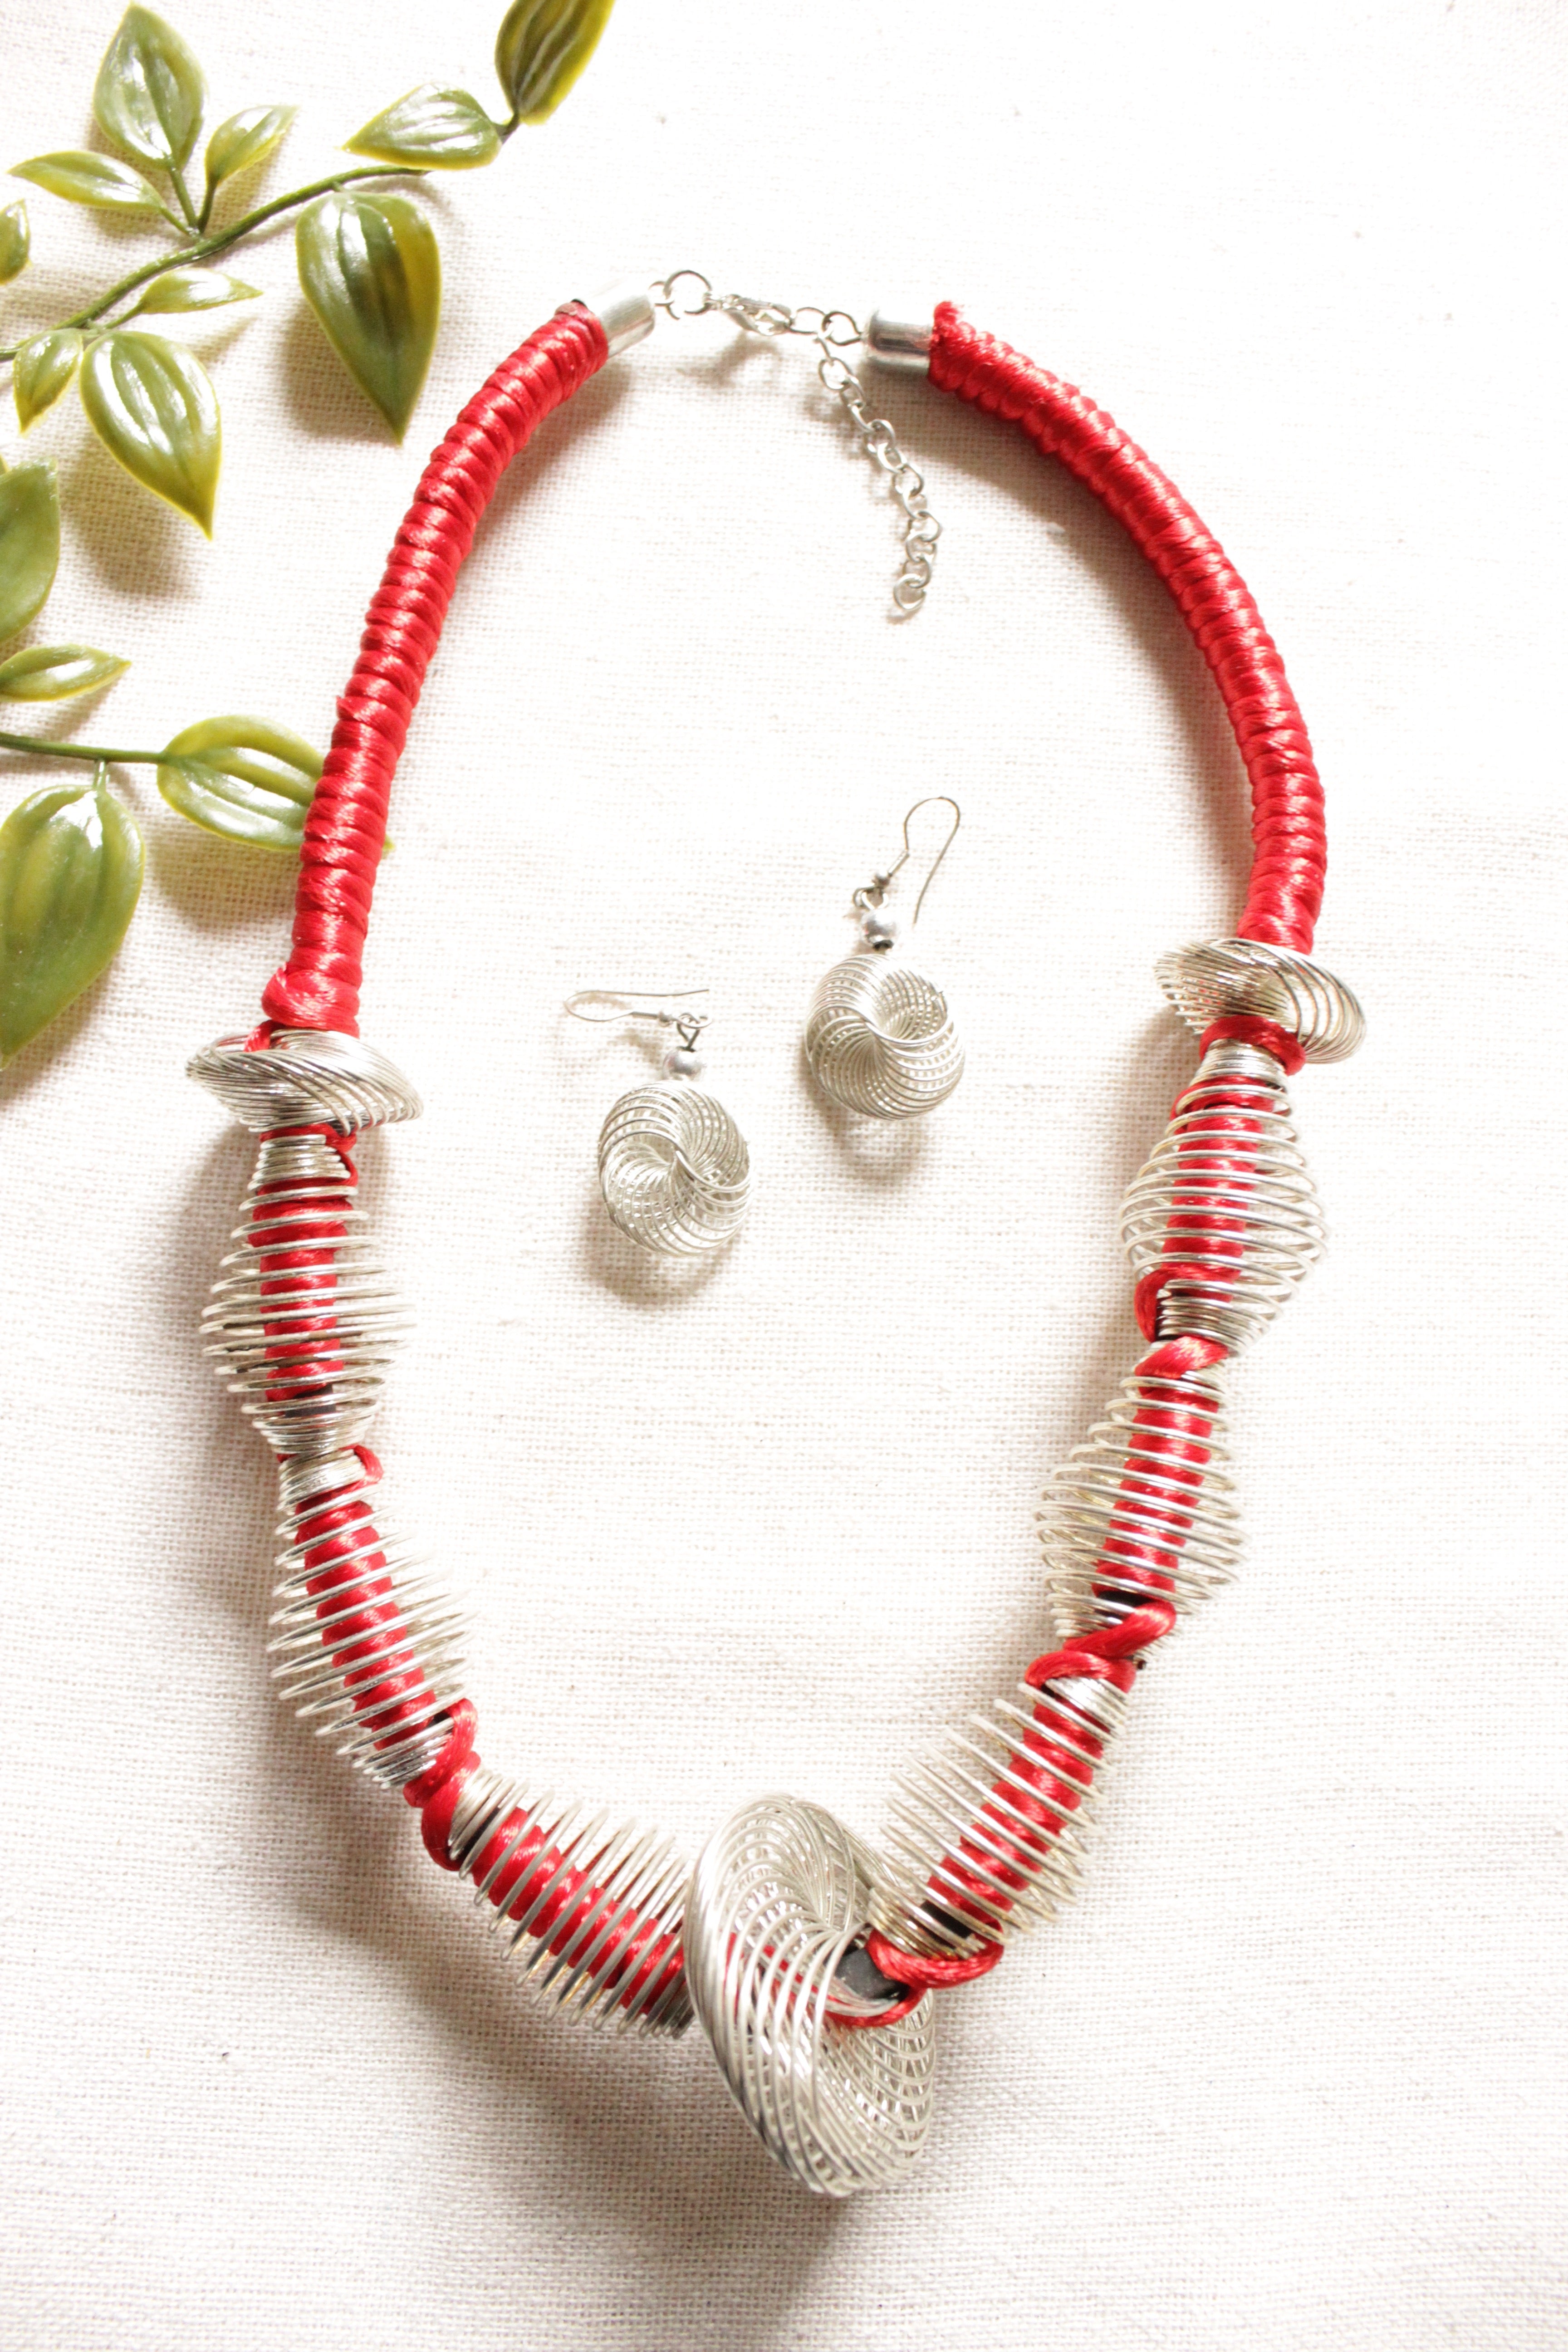 Metal Wire Braided Around Thread Necklace Red Contemporary Necklace Set